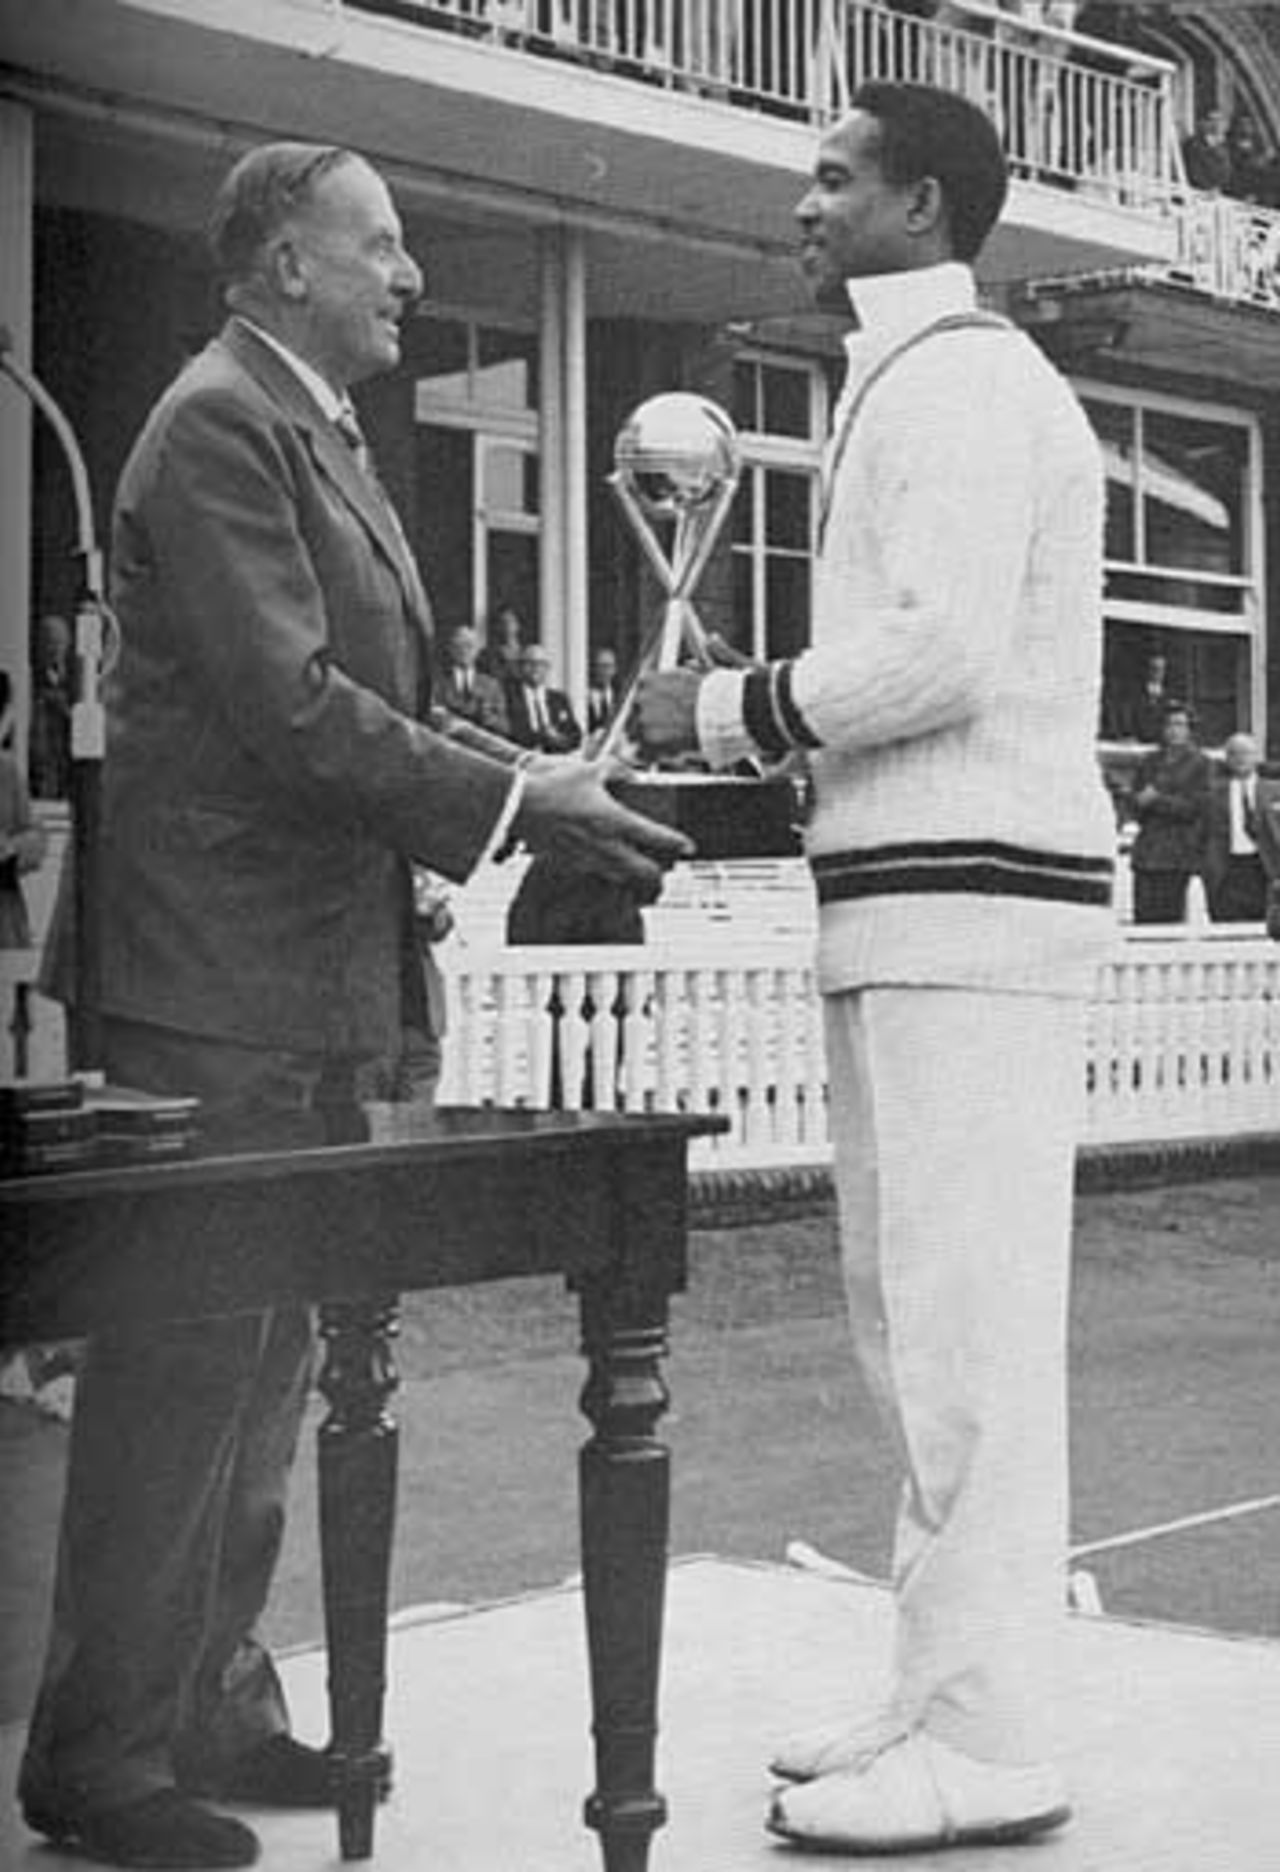 Garry Sobers receives the Rothman's Trophy, Rest of the World XI v Pakistan, Lord's, September 12, 1967